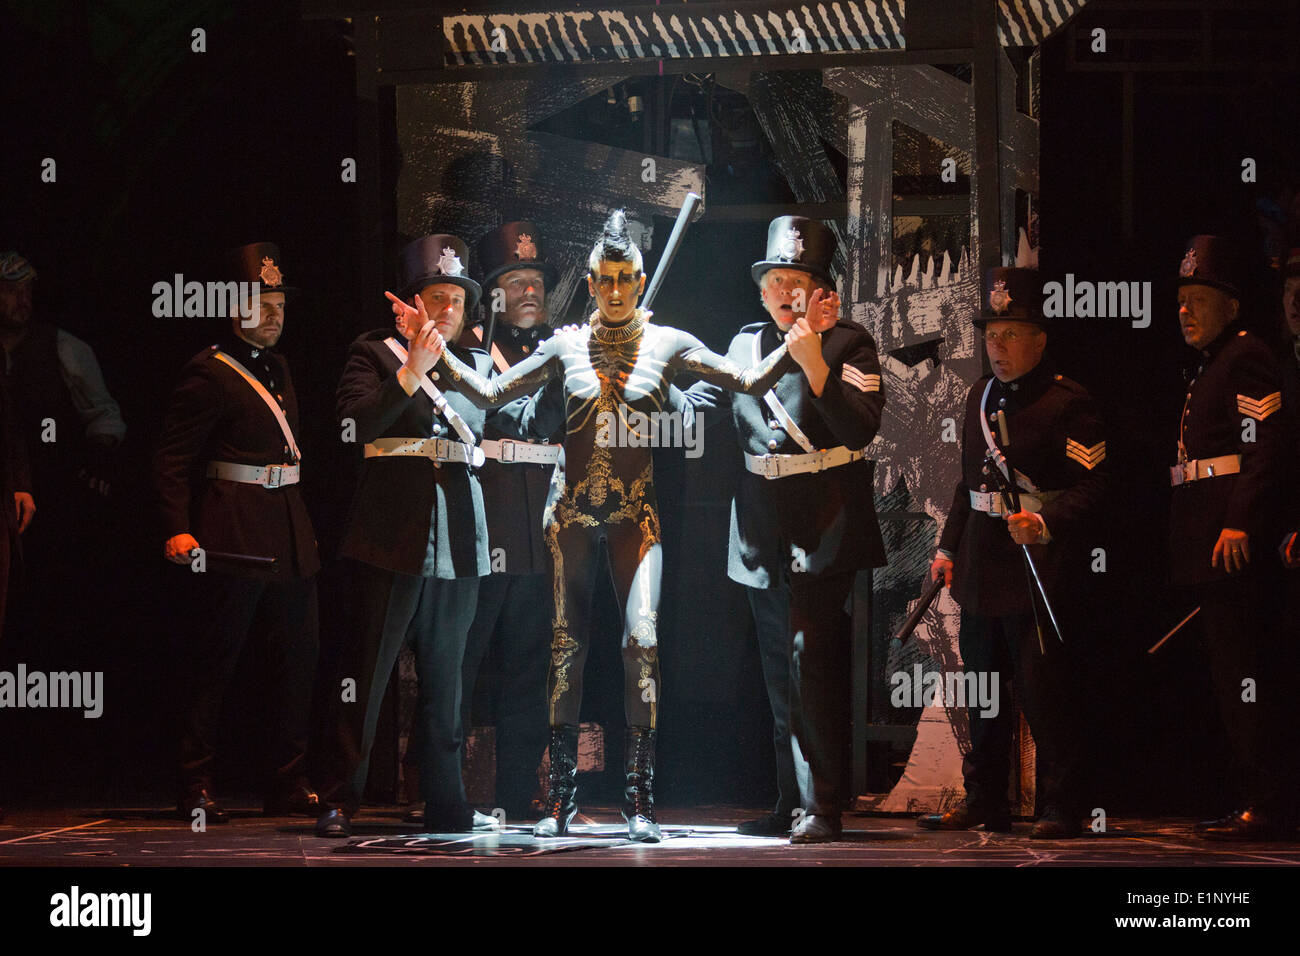 Dress rehearsal of the Berlioz opera Benvenuto Cellini directed by Terry Gilliam at the London Coliseum. Stock Photo